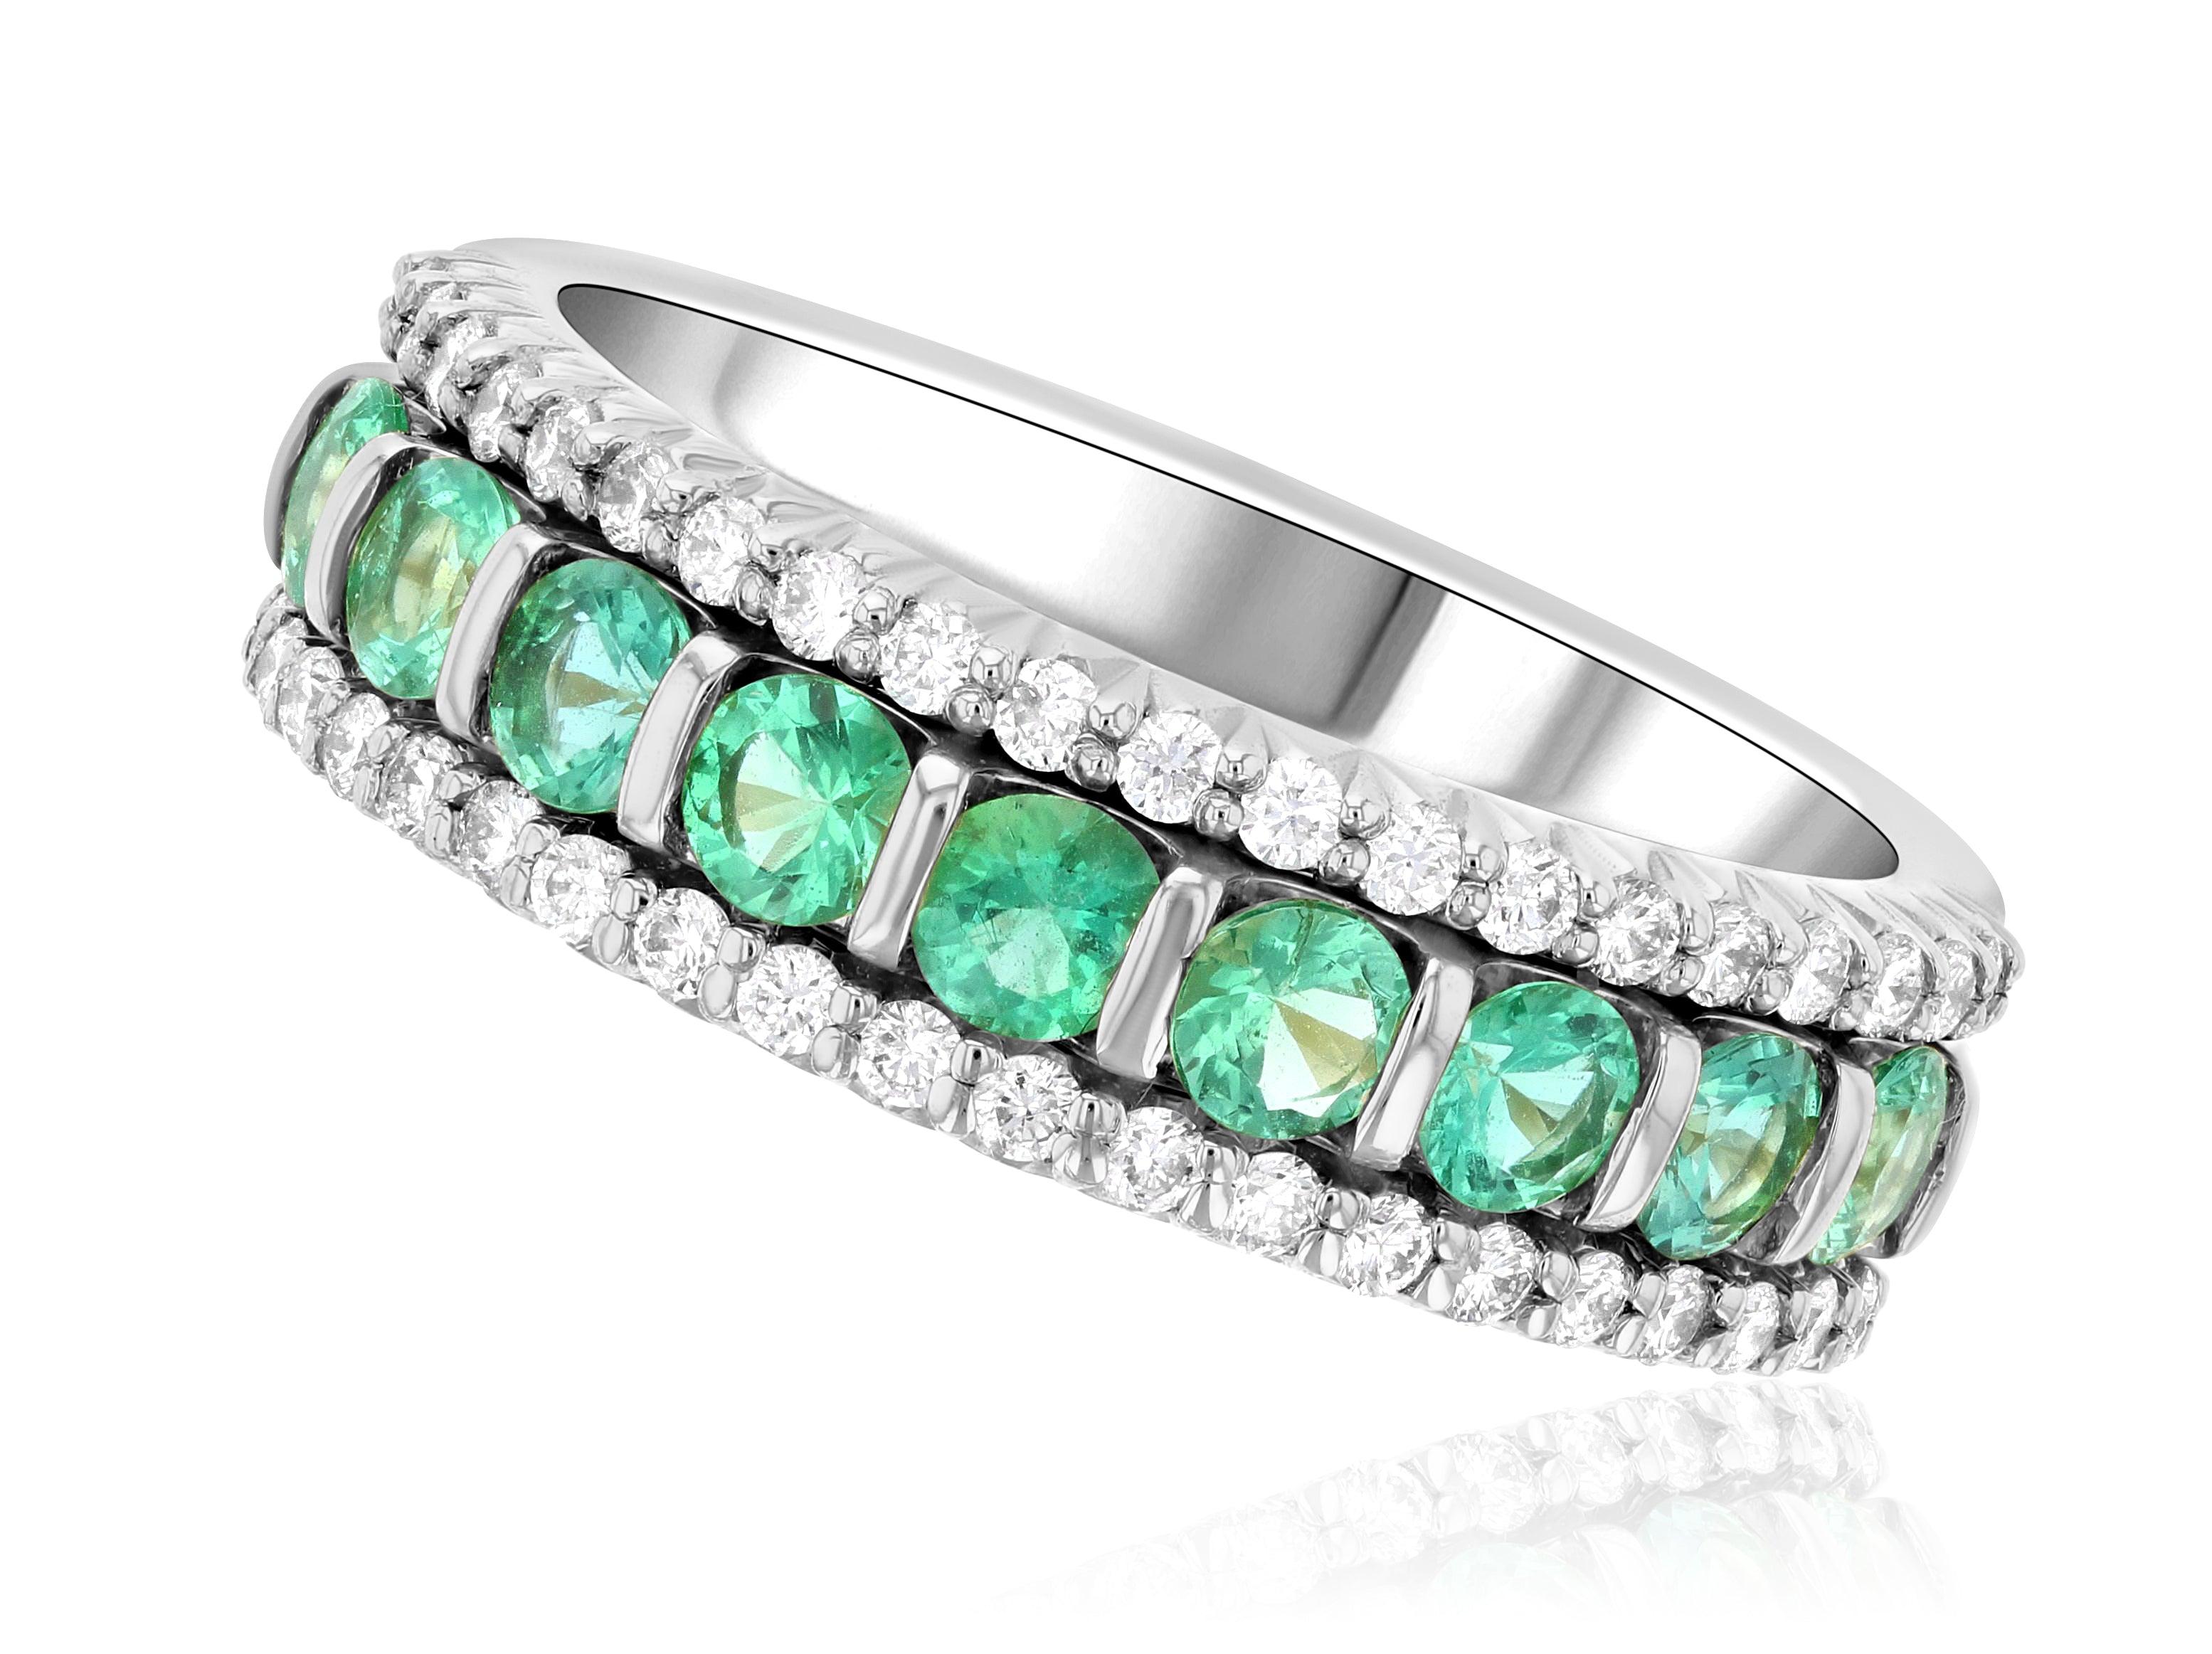 Three-Row Shared Prong Diamond and Emerald Anniversary Ring (1.12 ct. tw.) - The Brothers Jewelry Co.